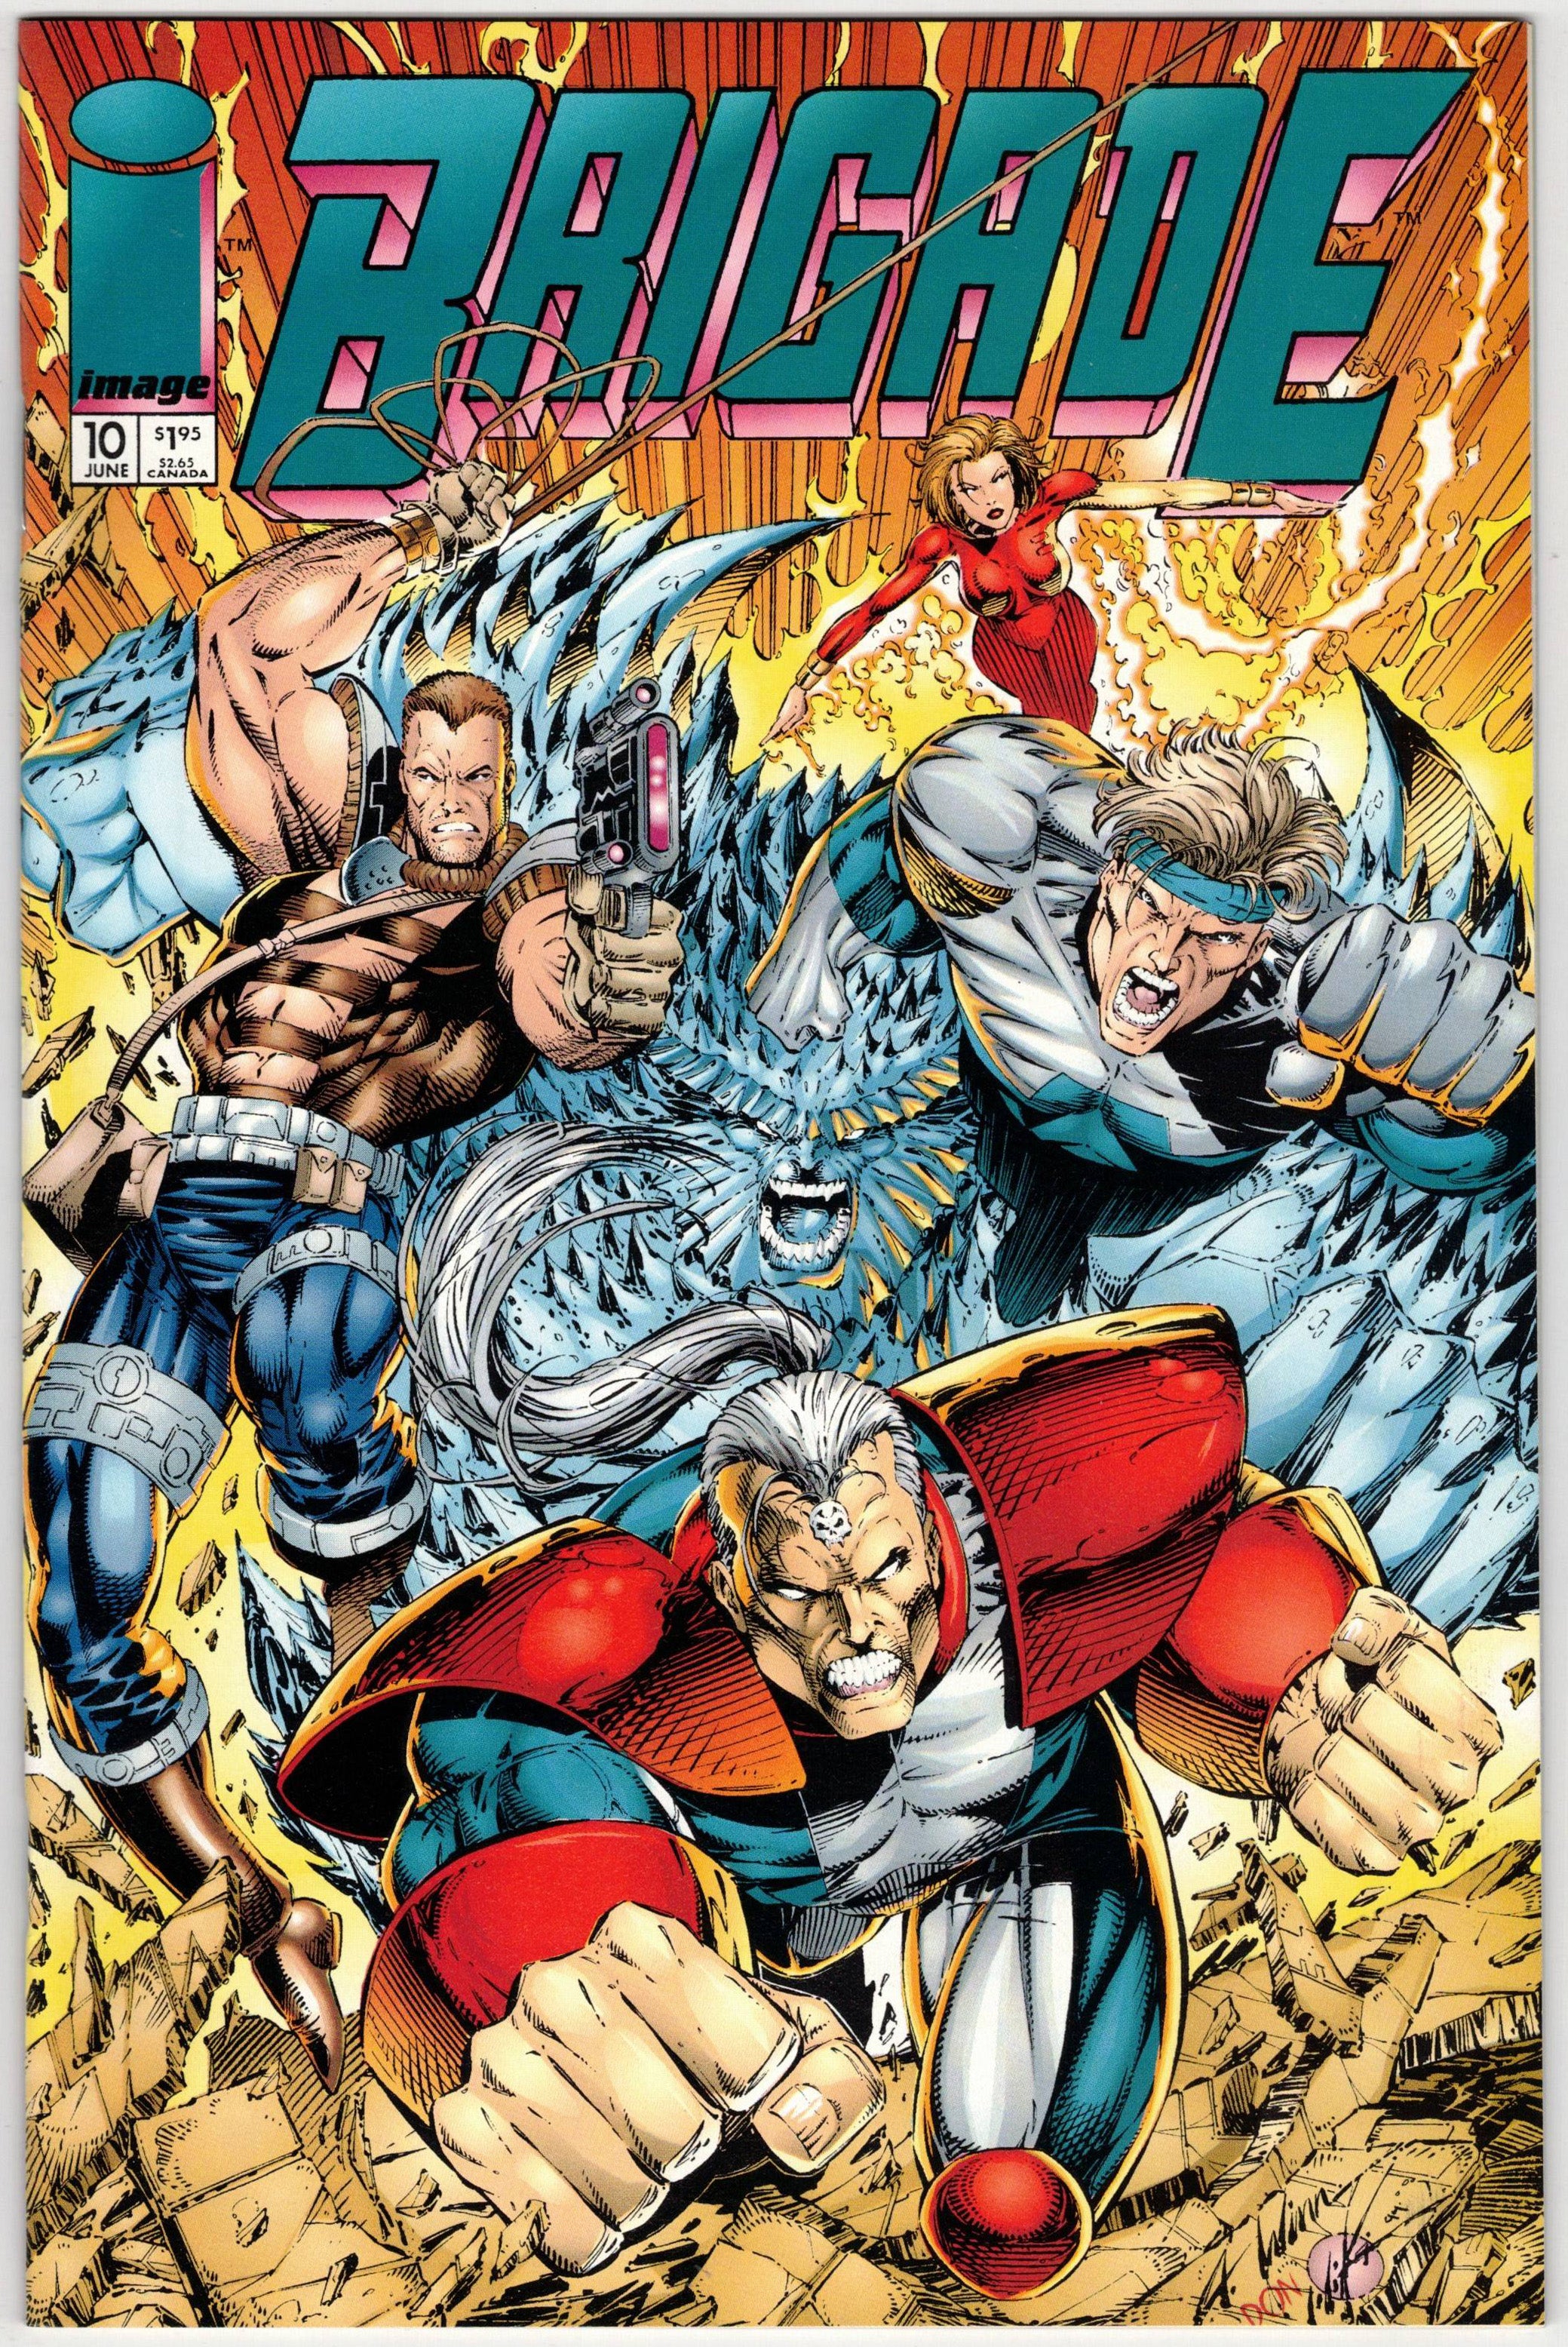 Photo of Brigade, Vol. 2 (1994) Issue 10 - Comic sold by Stronghold Collectibles